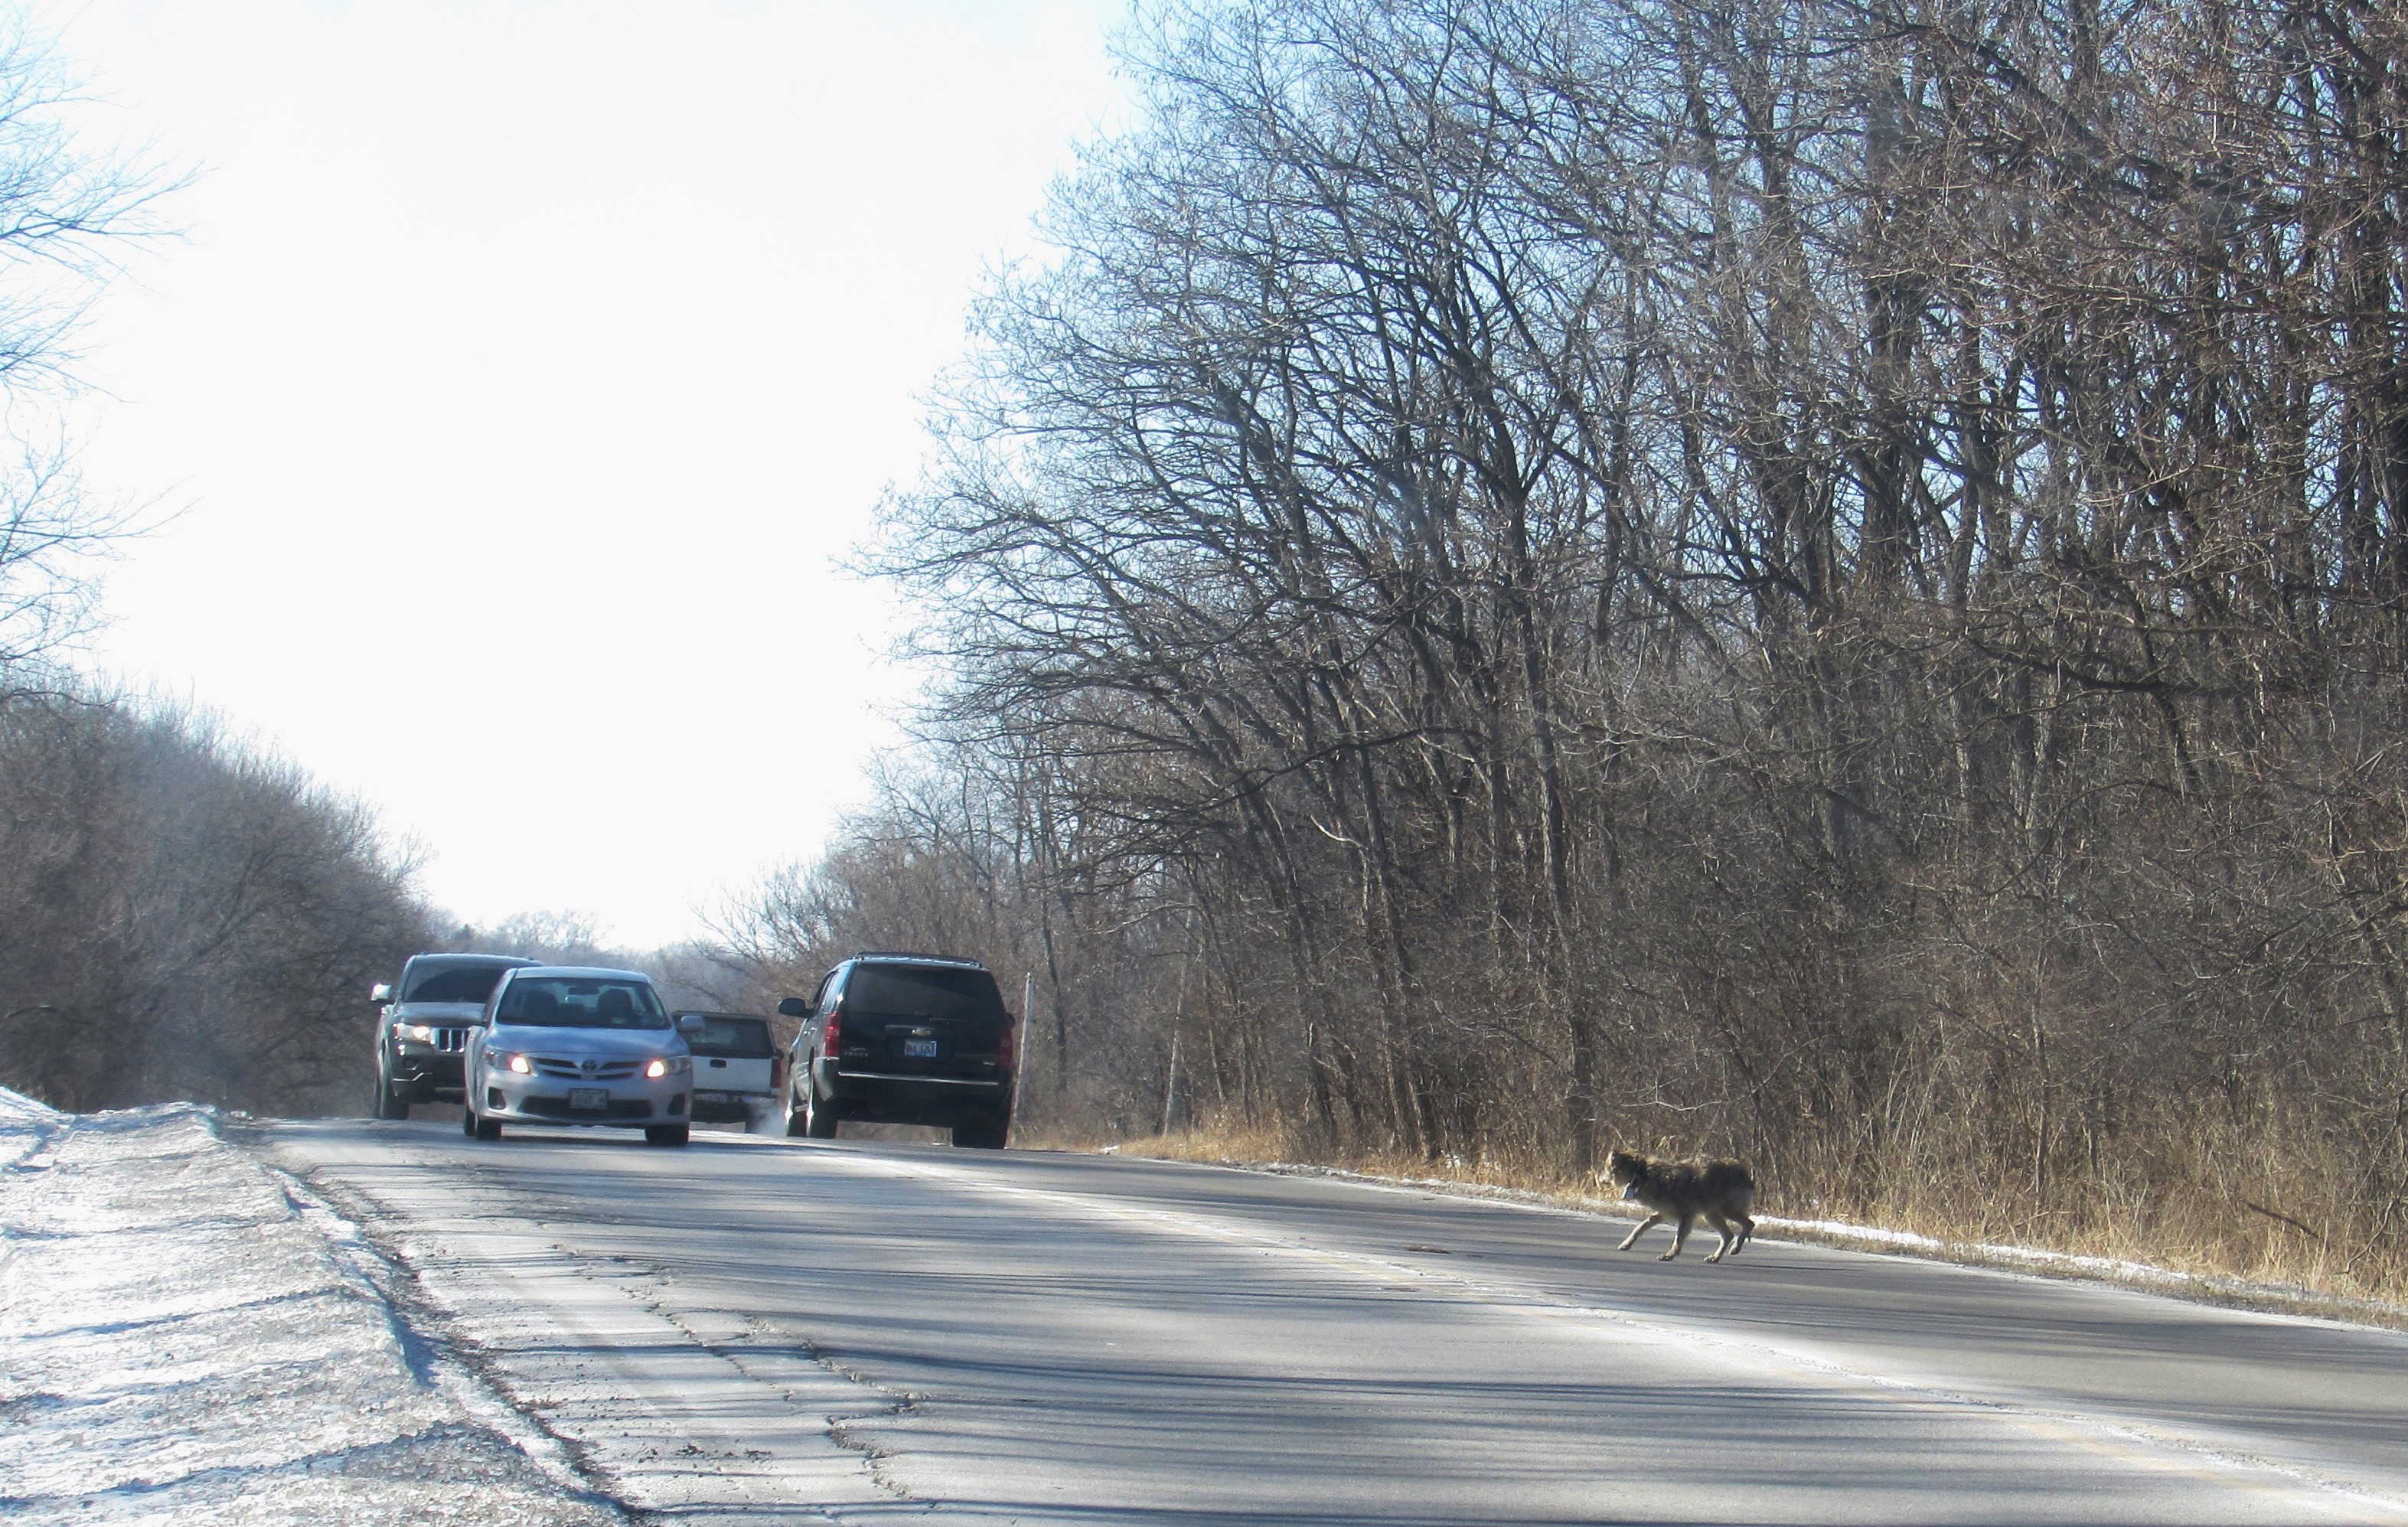 Coyote running in traffic